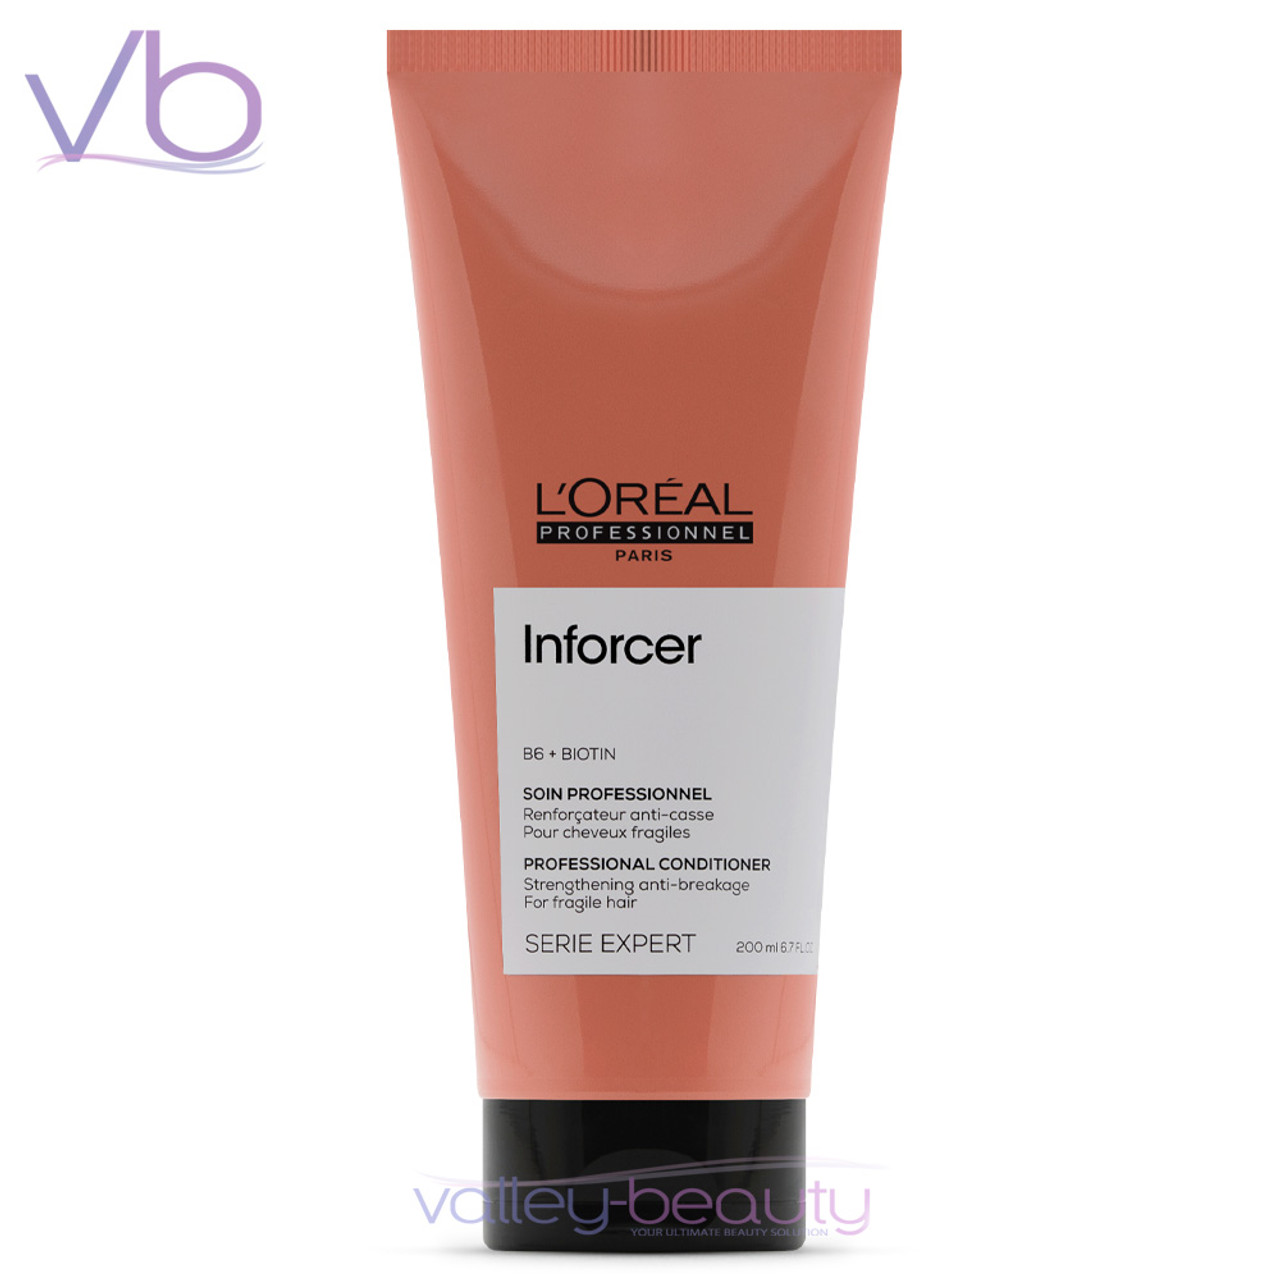 L'Oreal L’Oreal Professionnel Serie Expert Inforcer Conditioner, 6.7oz